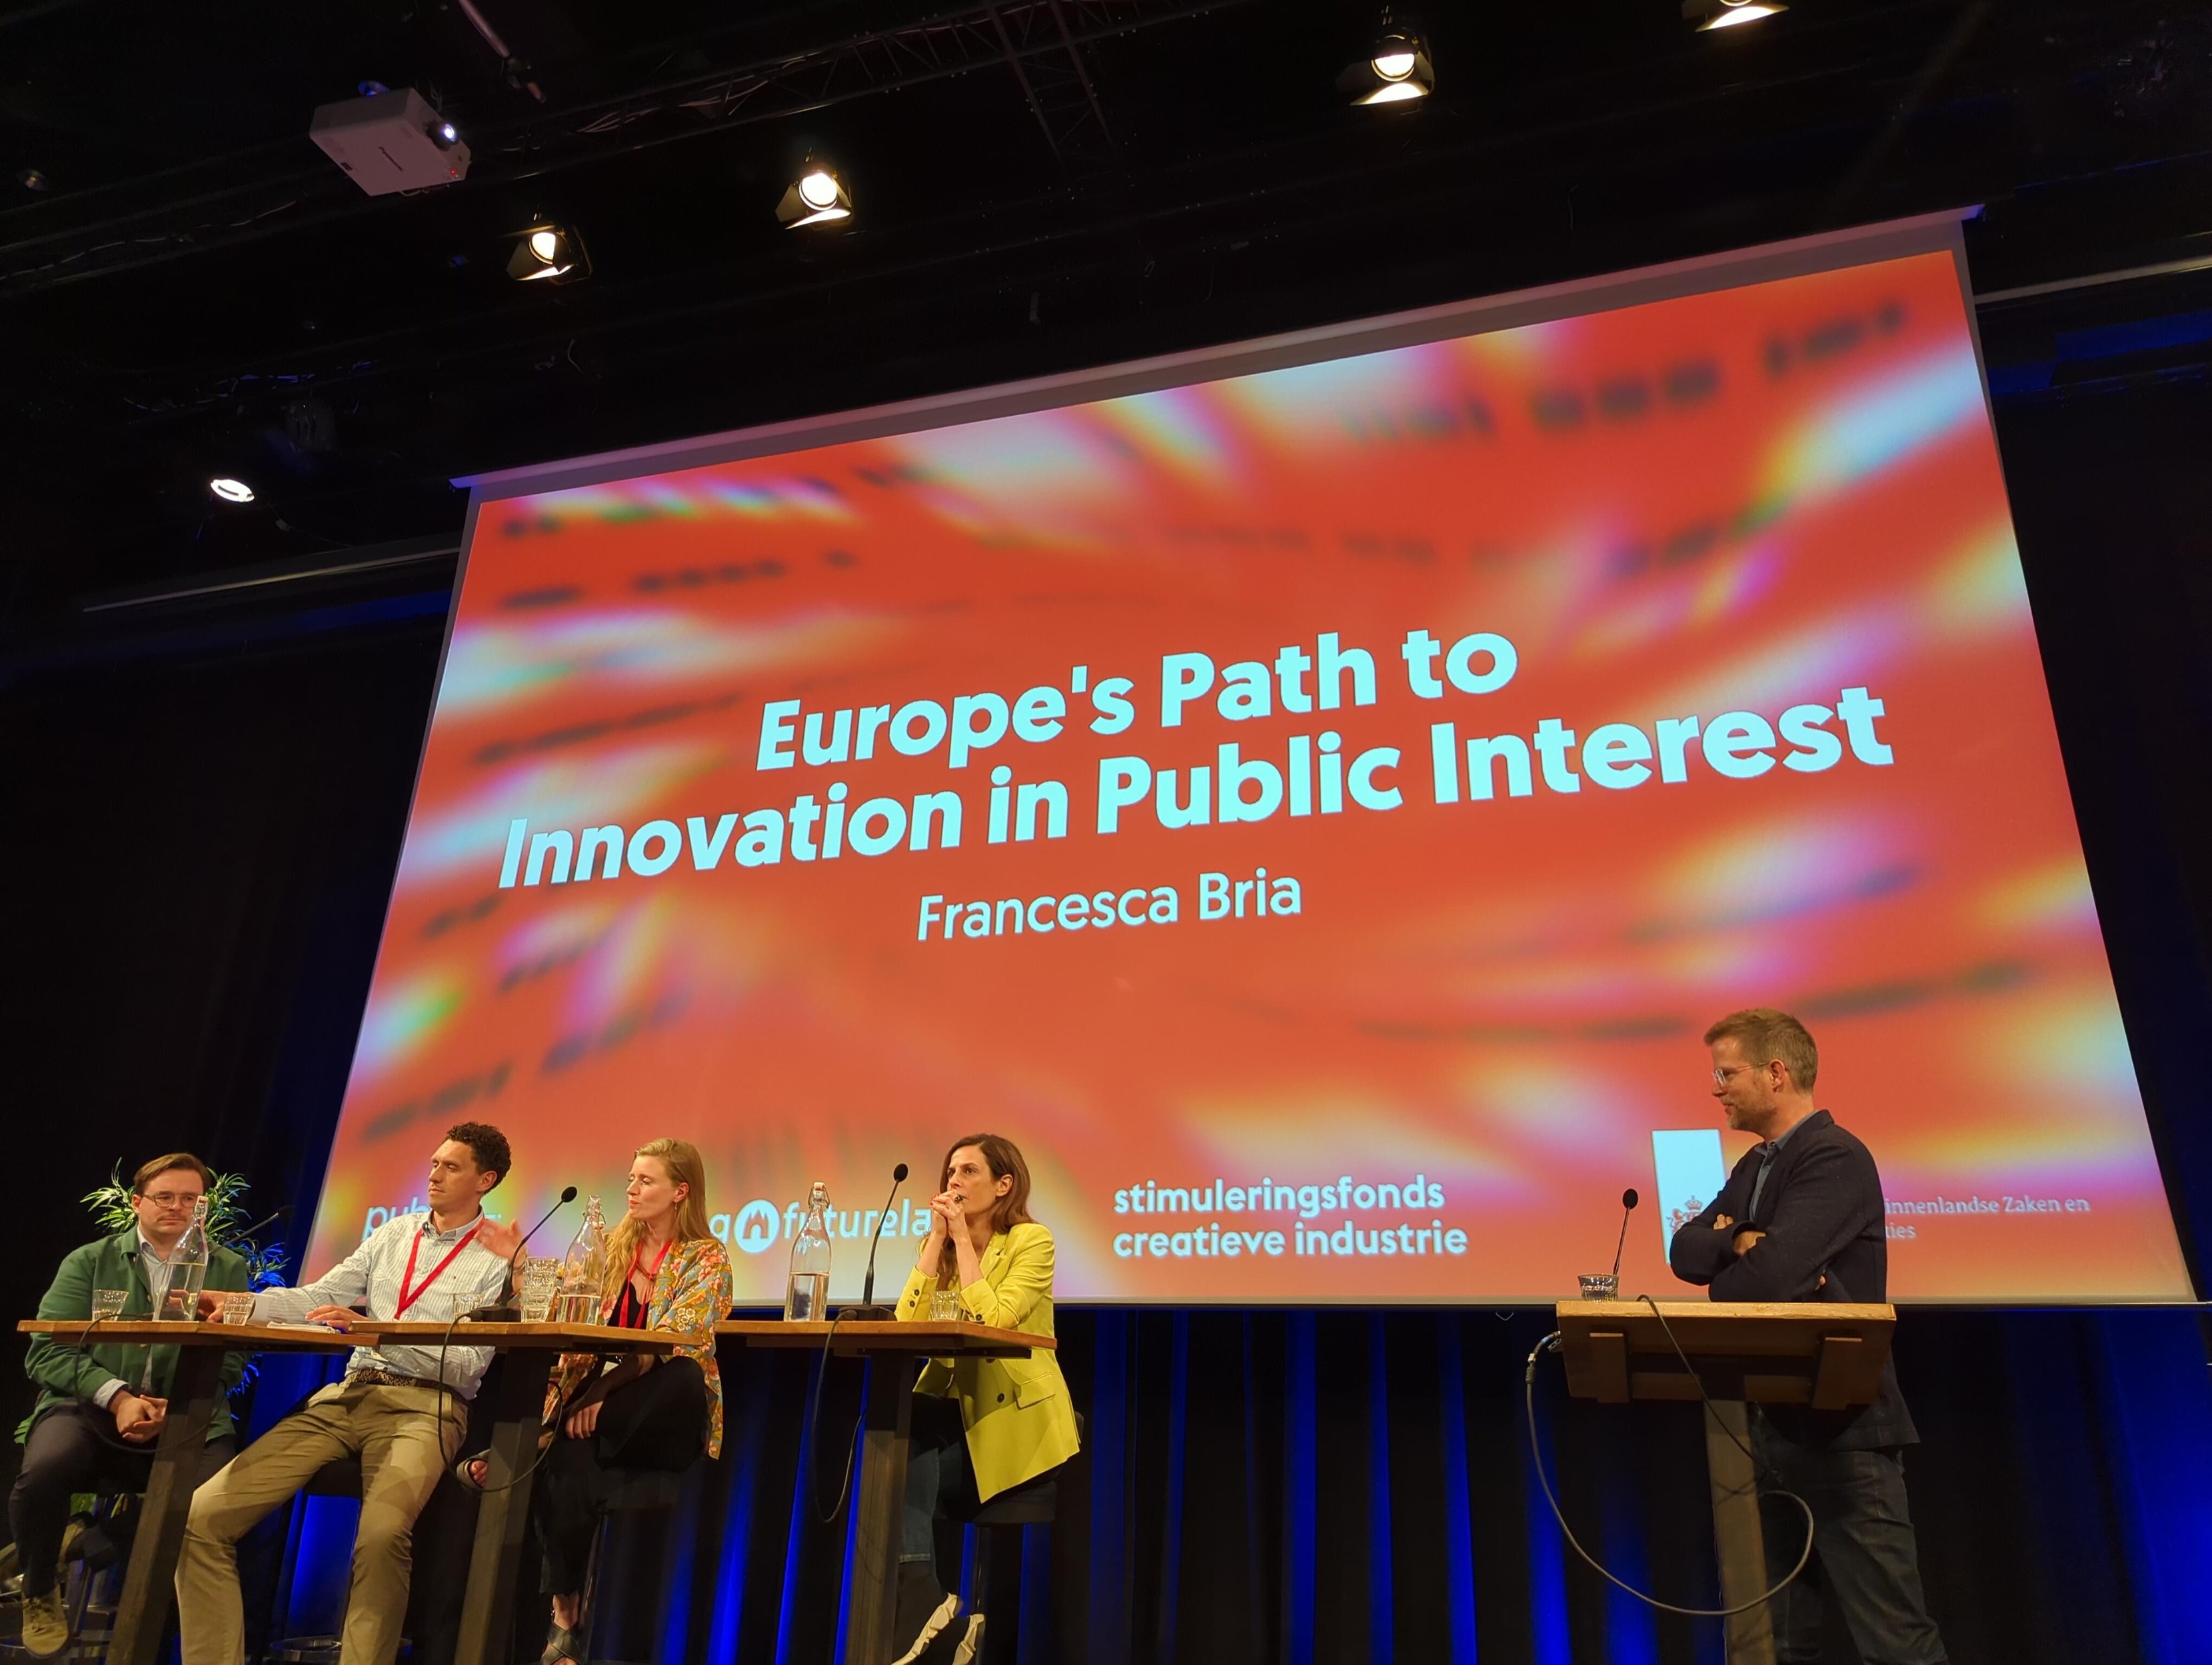 Slide on the screen: "Europe's Path to Innovation in the Public Interest&quot;